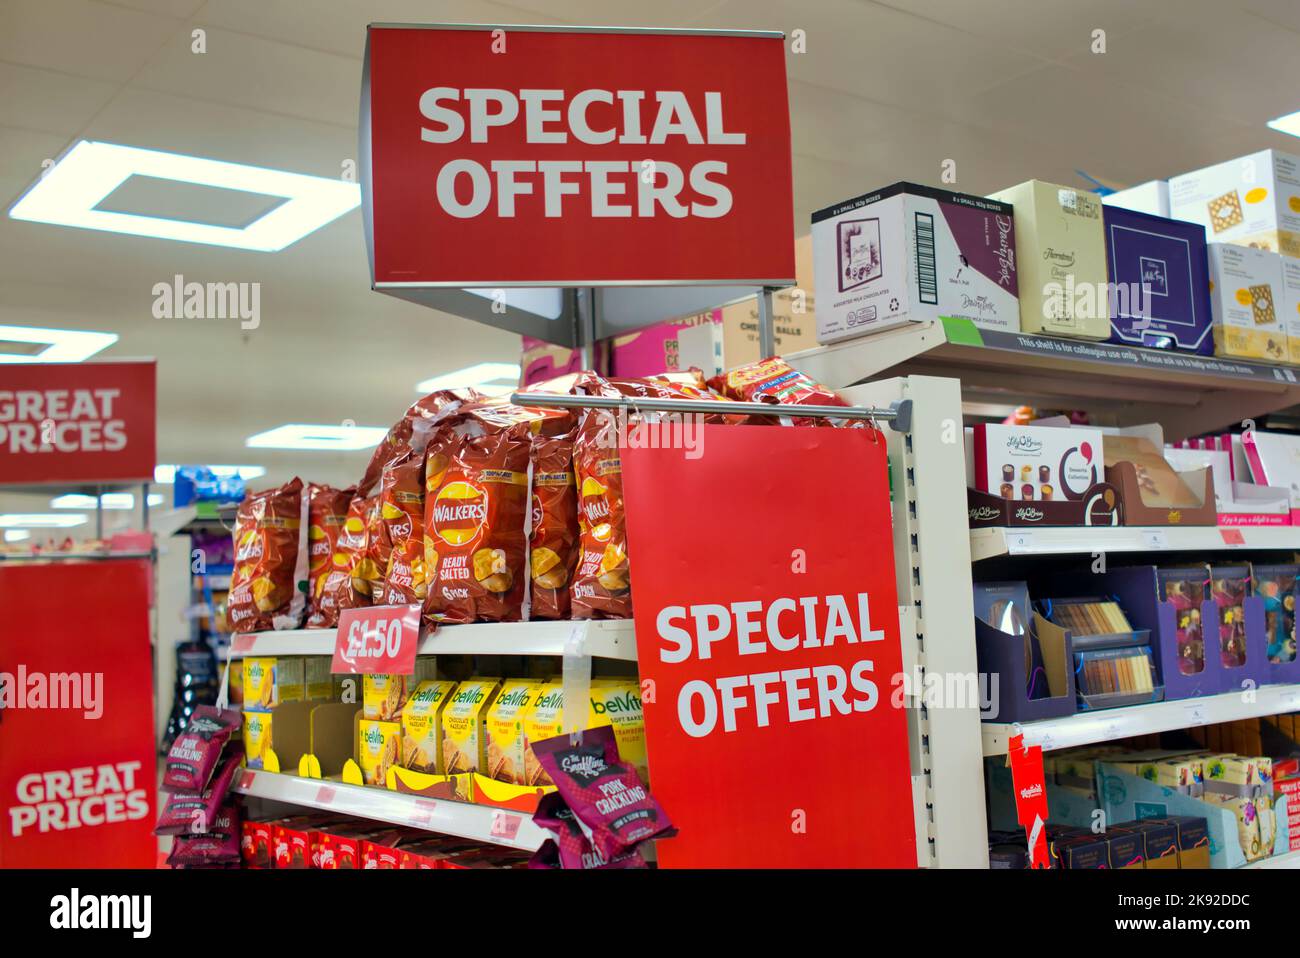 Special offers on groceries